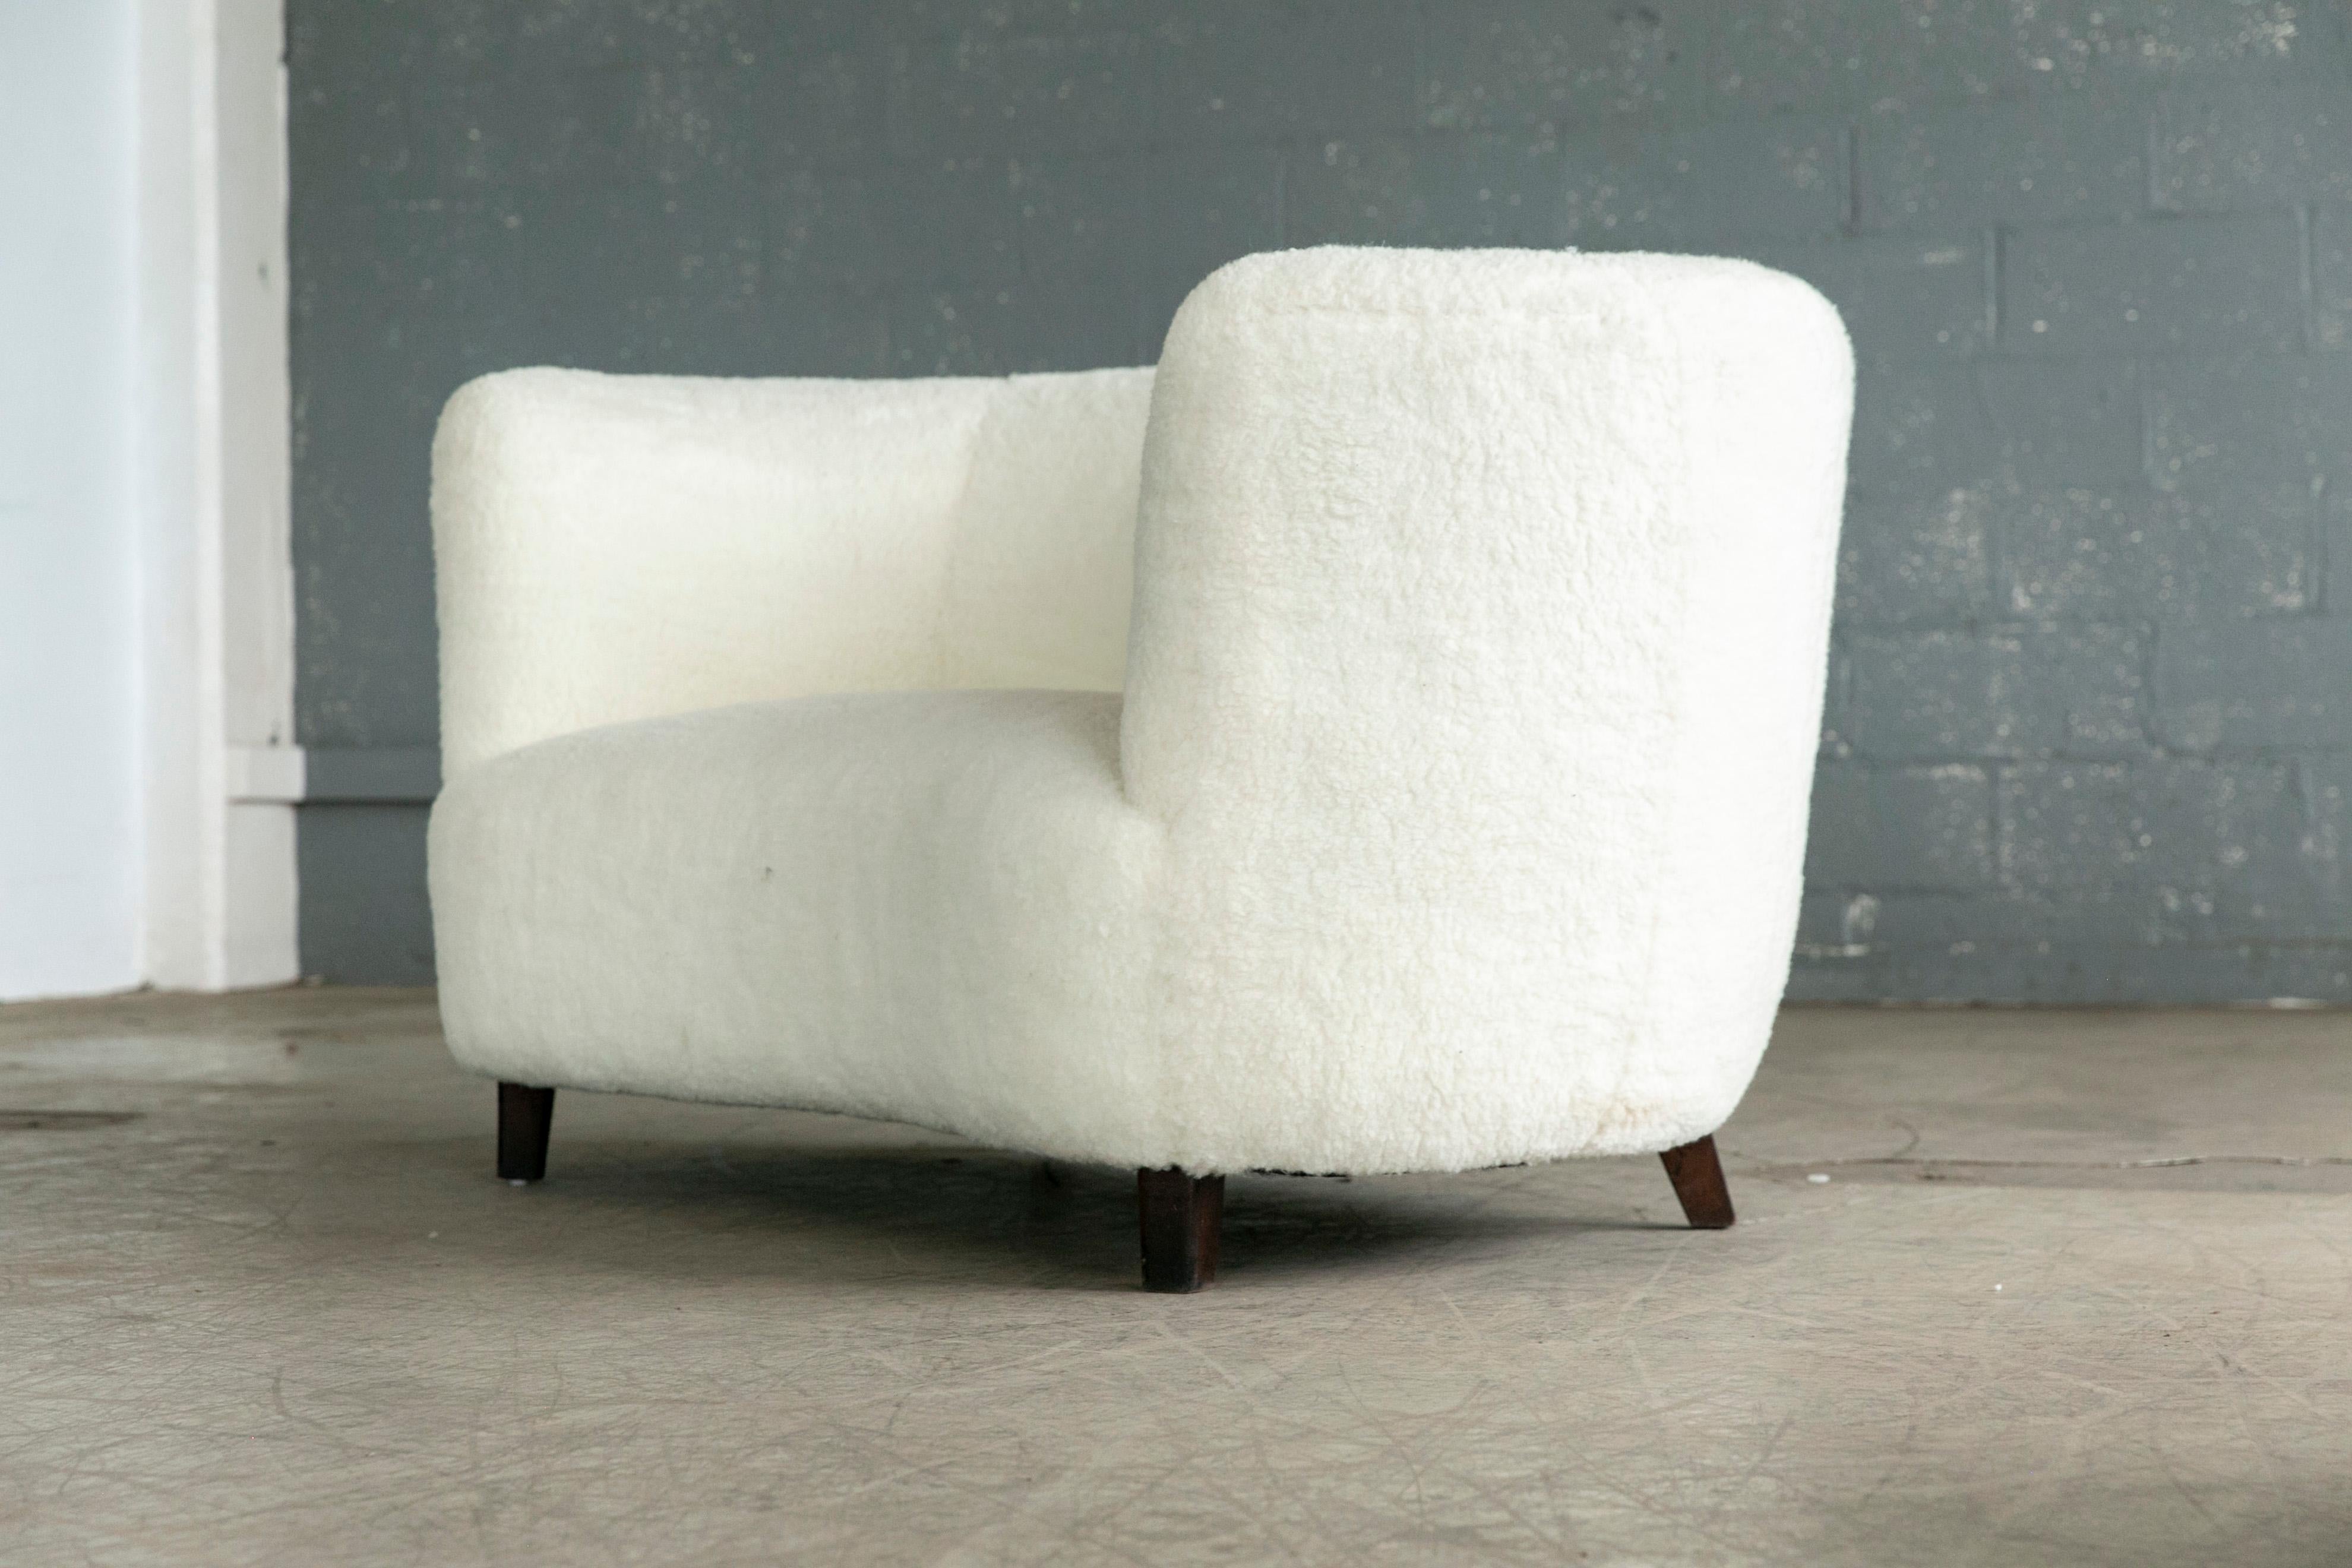 Wool Banana Shaped Curved Loveseat or Sofa Covered in Lambswool Denamrk 1940's For Sale